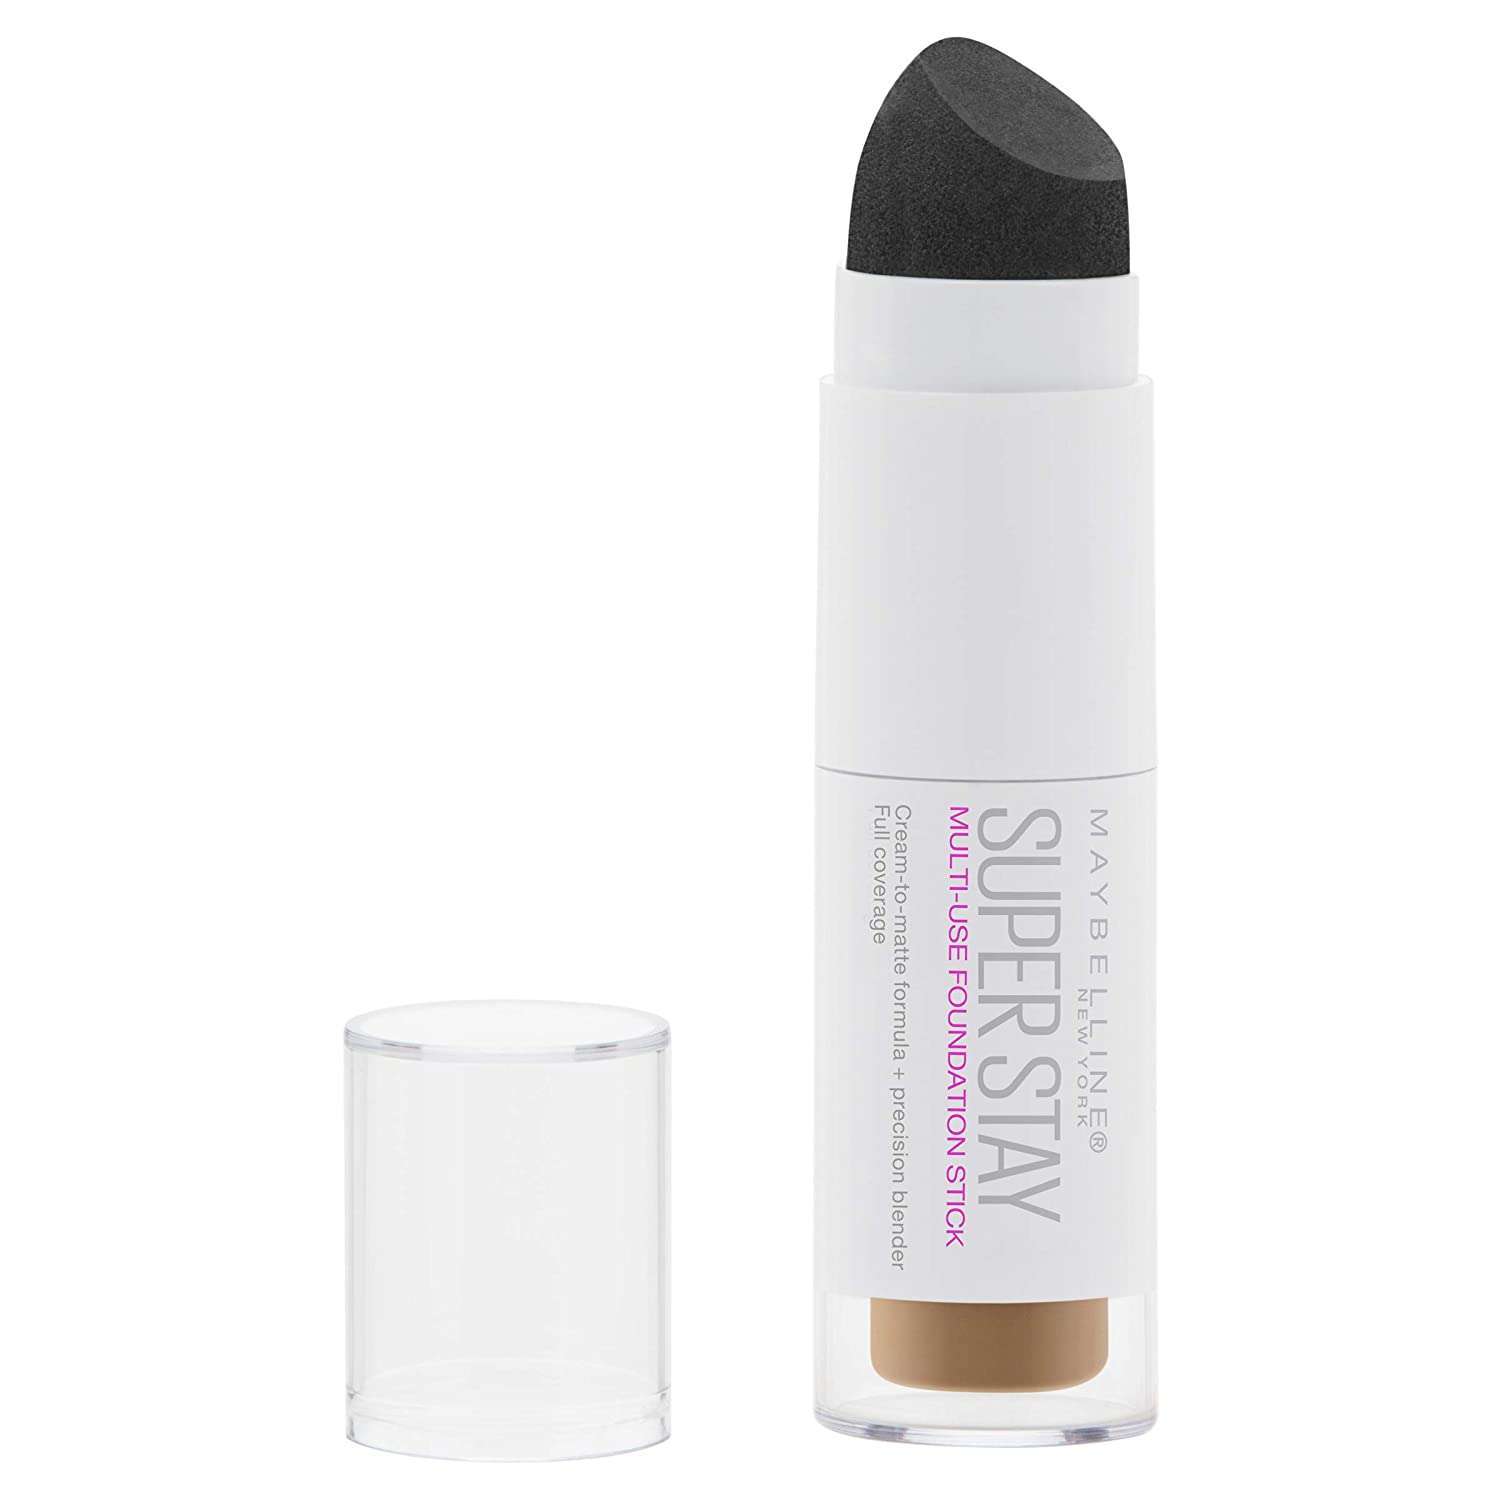 Maybelline Super Stay Multi-Use Foundation Stick - 330 Toffeeorabelca